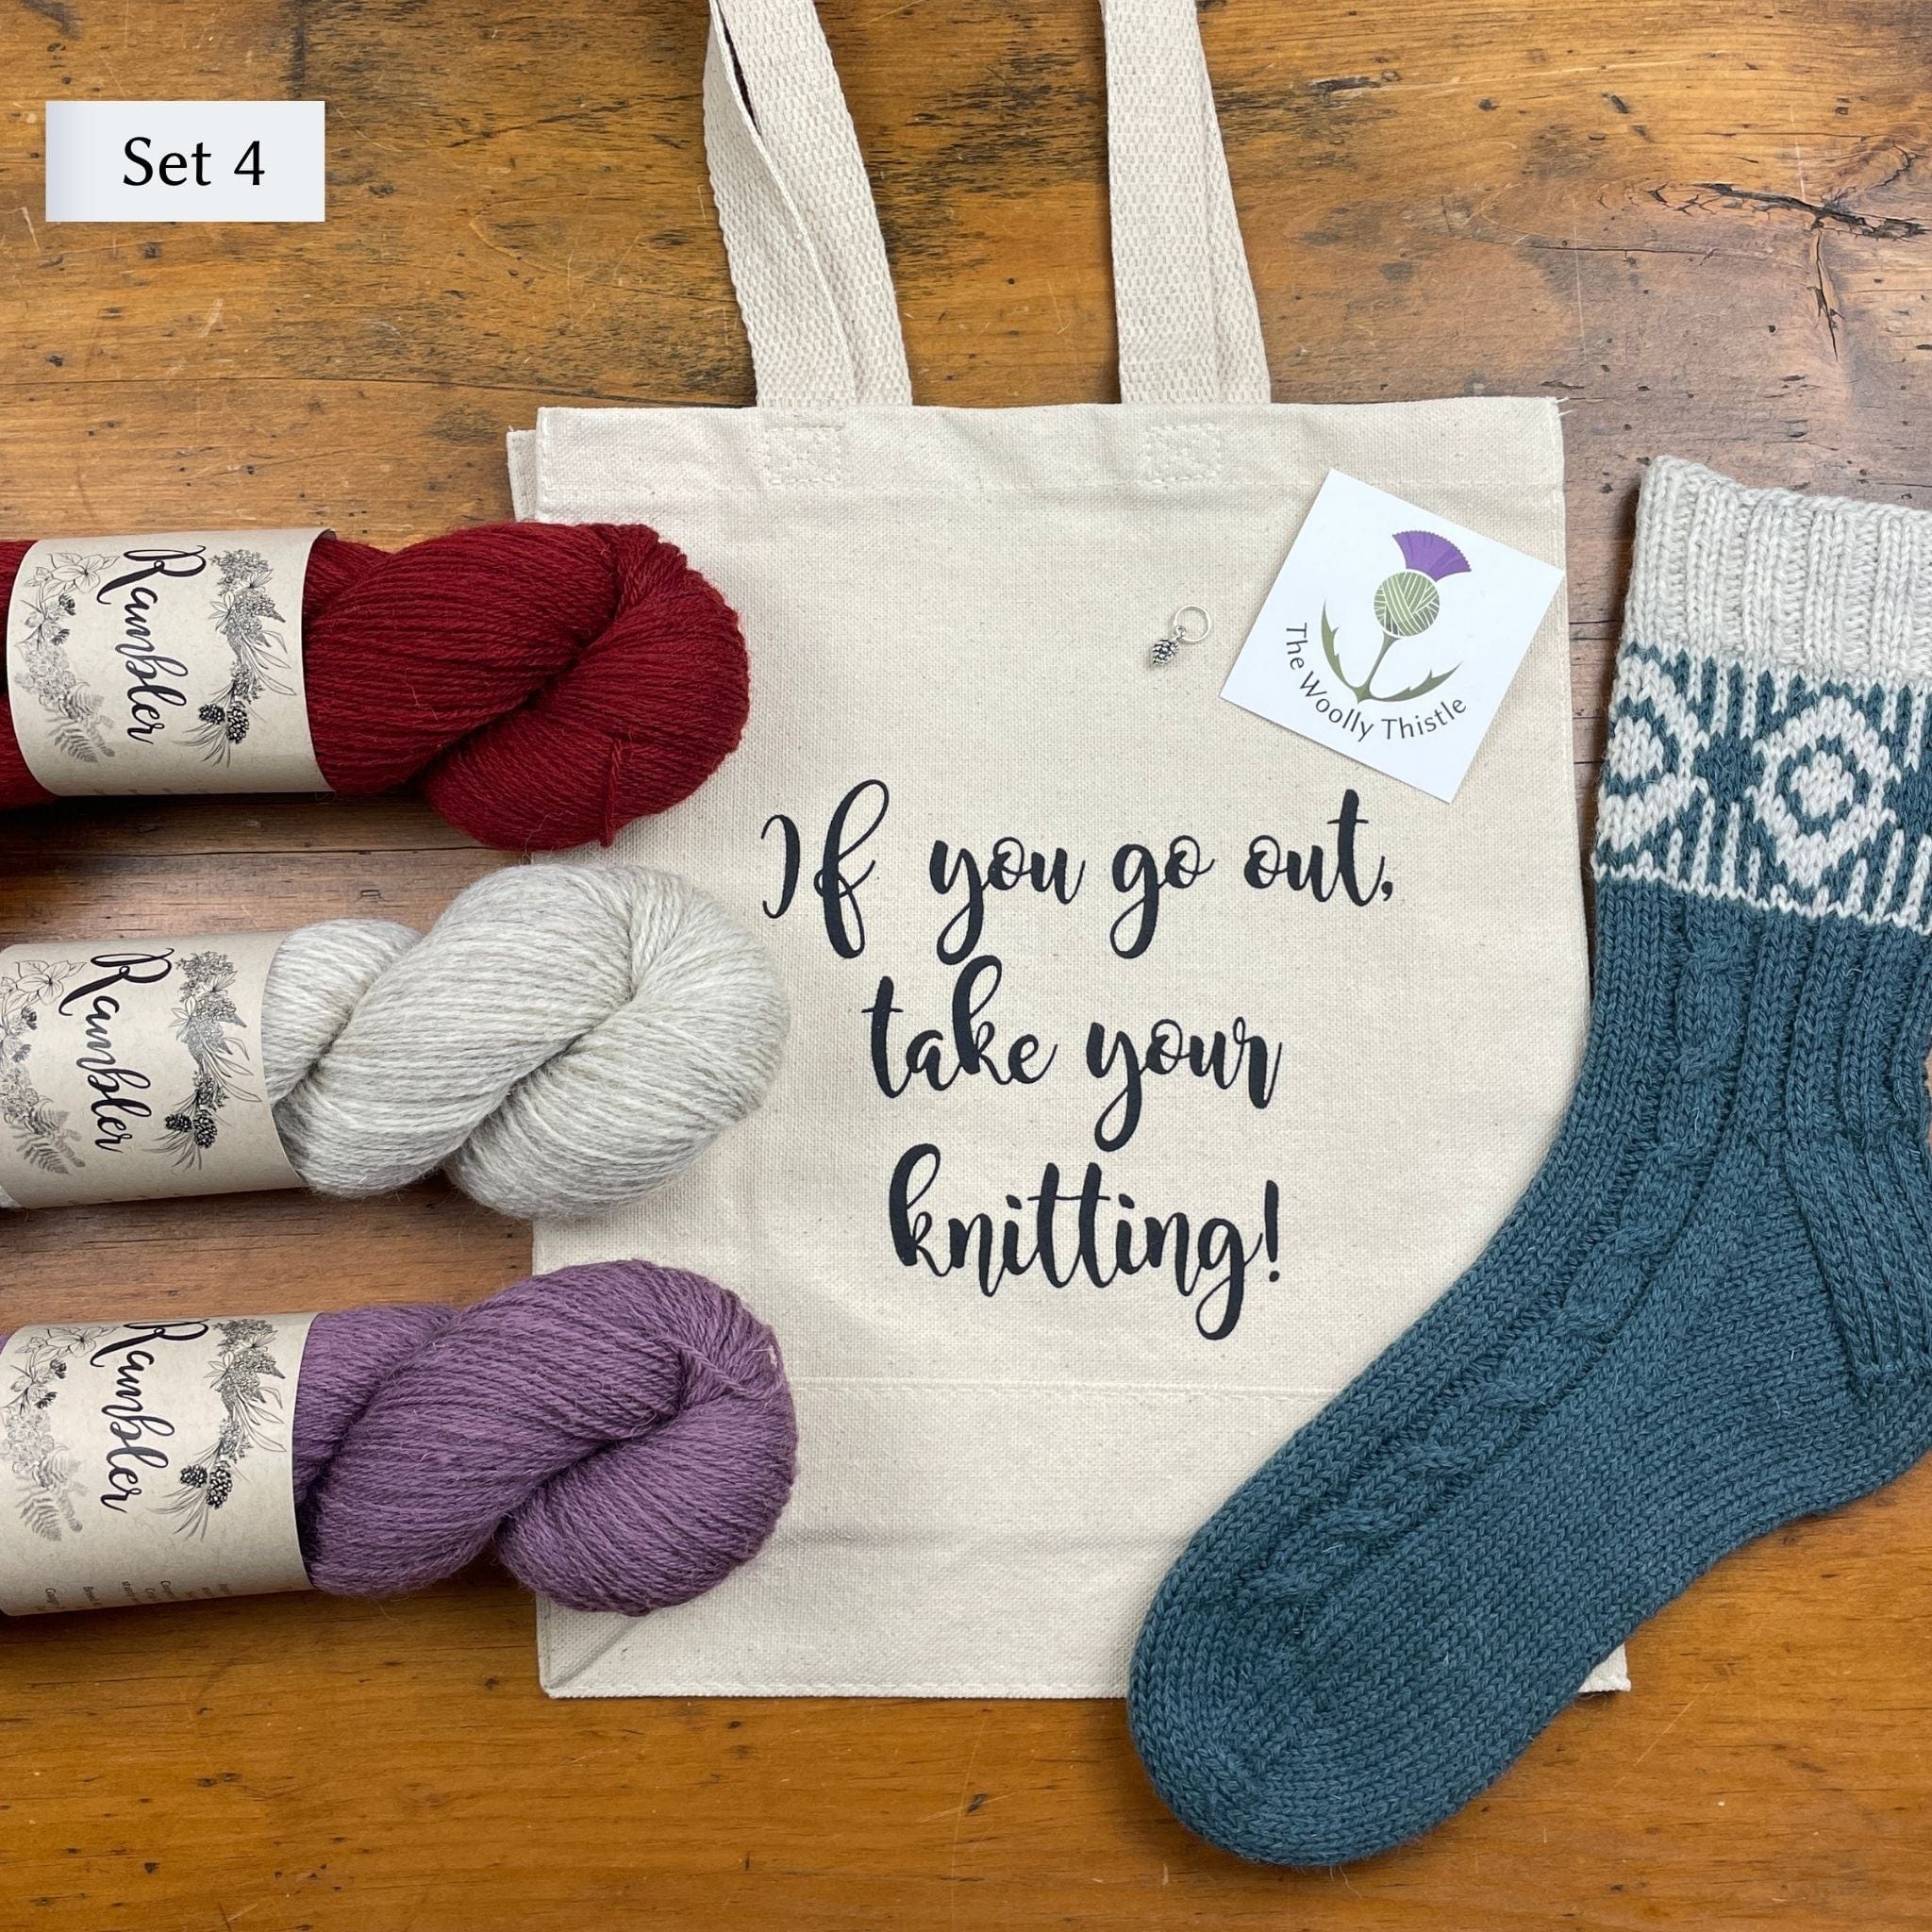 Learn to Knit Kit: Socks – gather here online